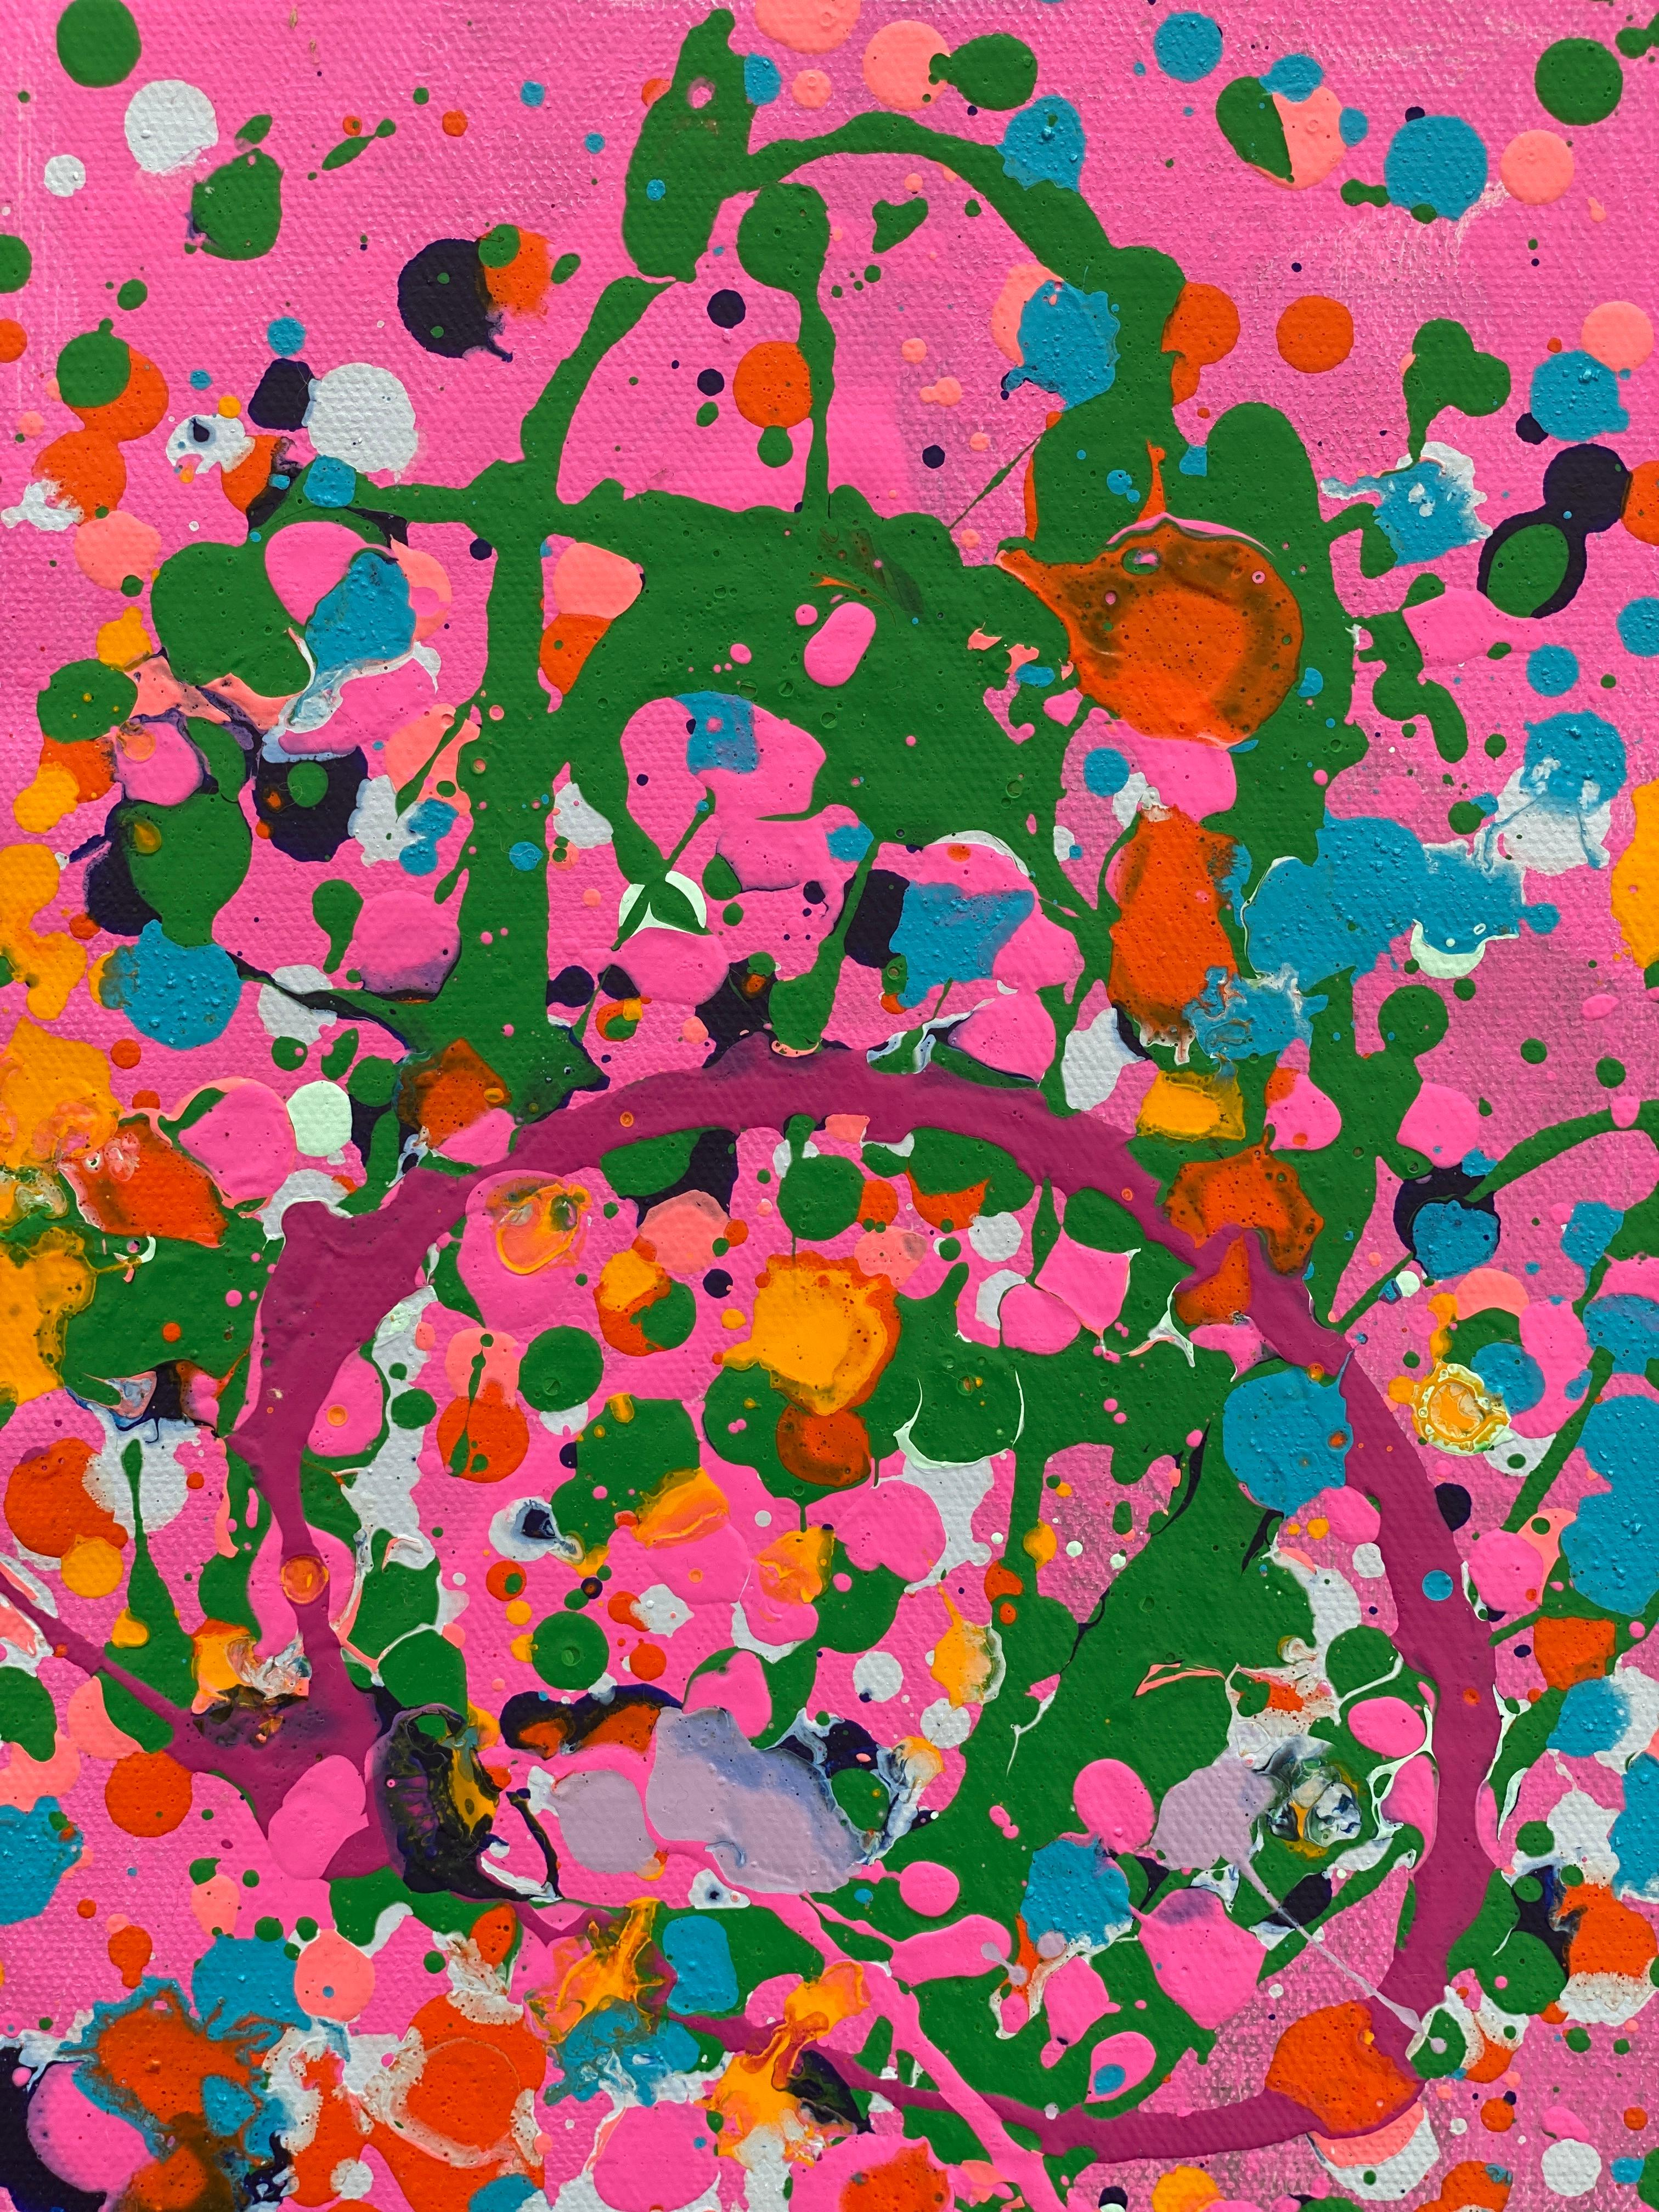 Colorful spatter no7 drip abstract expressionist Jackson Pollock pink green blue 1